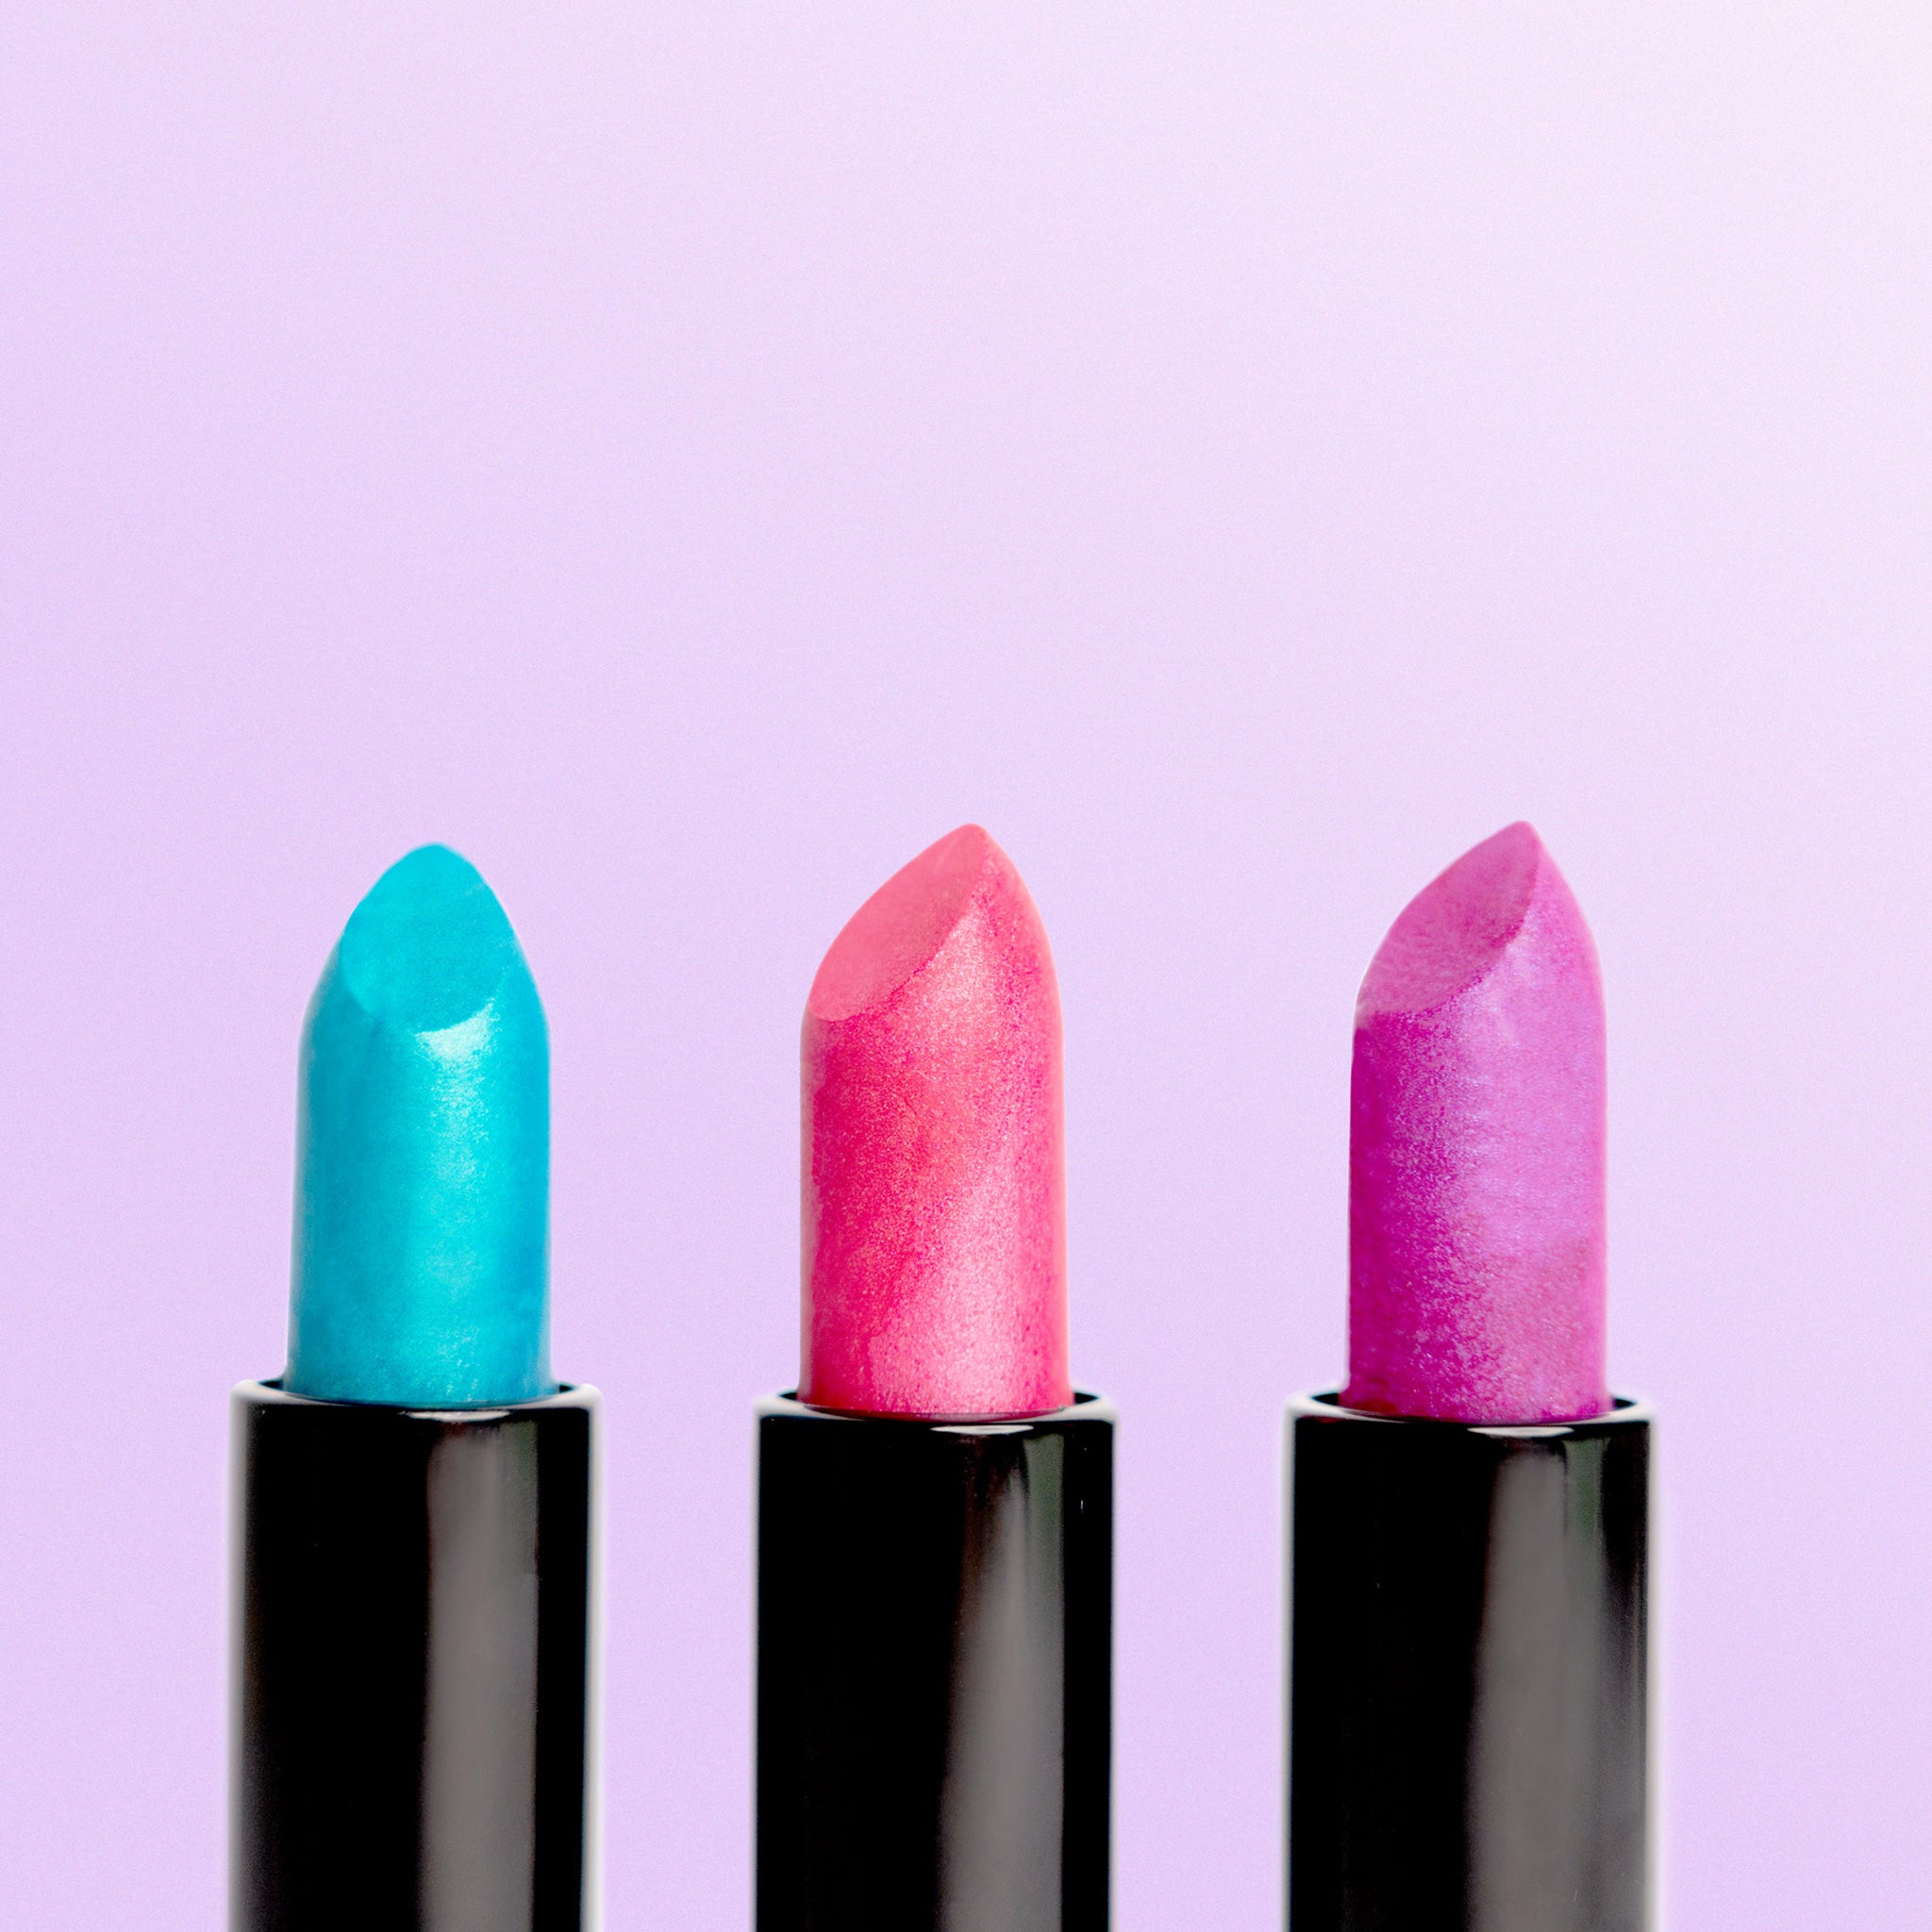 Oh-Flossy_Natural-Kids-Makeup-Lipstick-trio